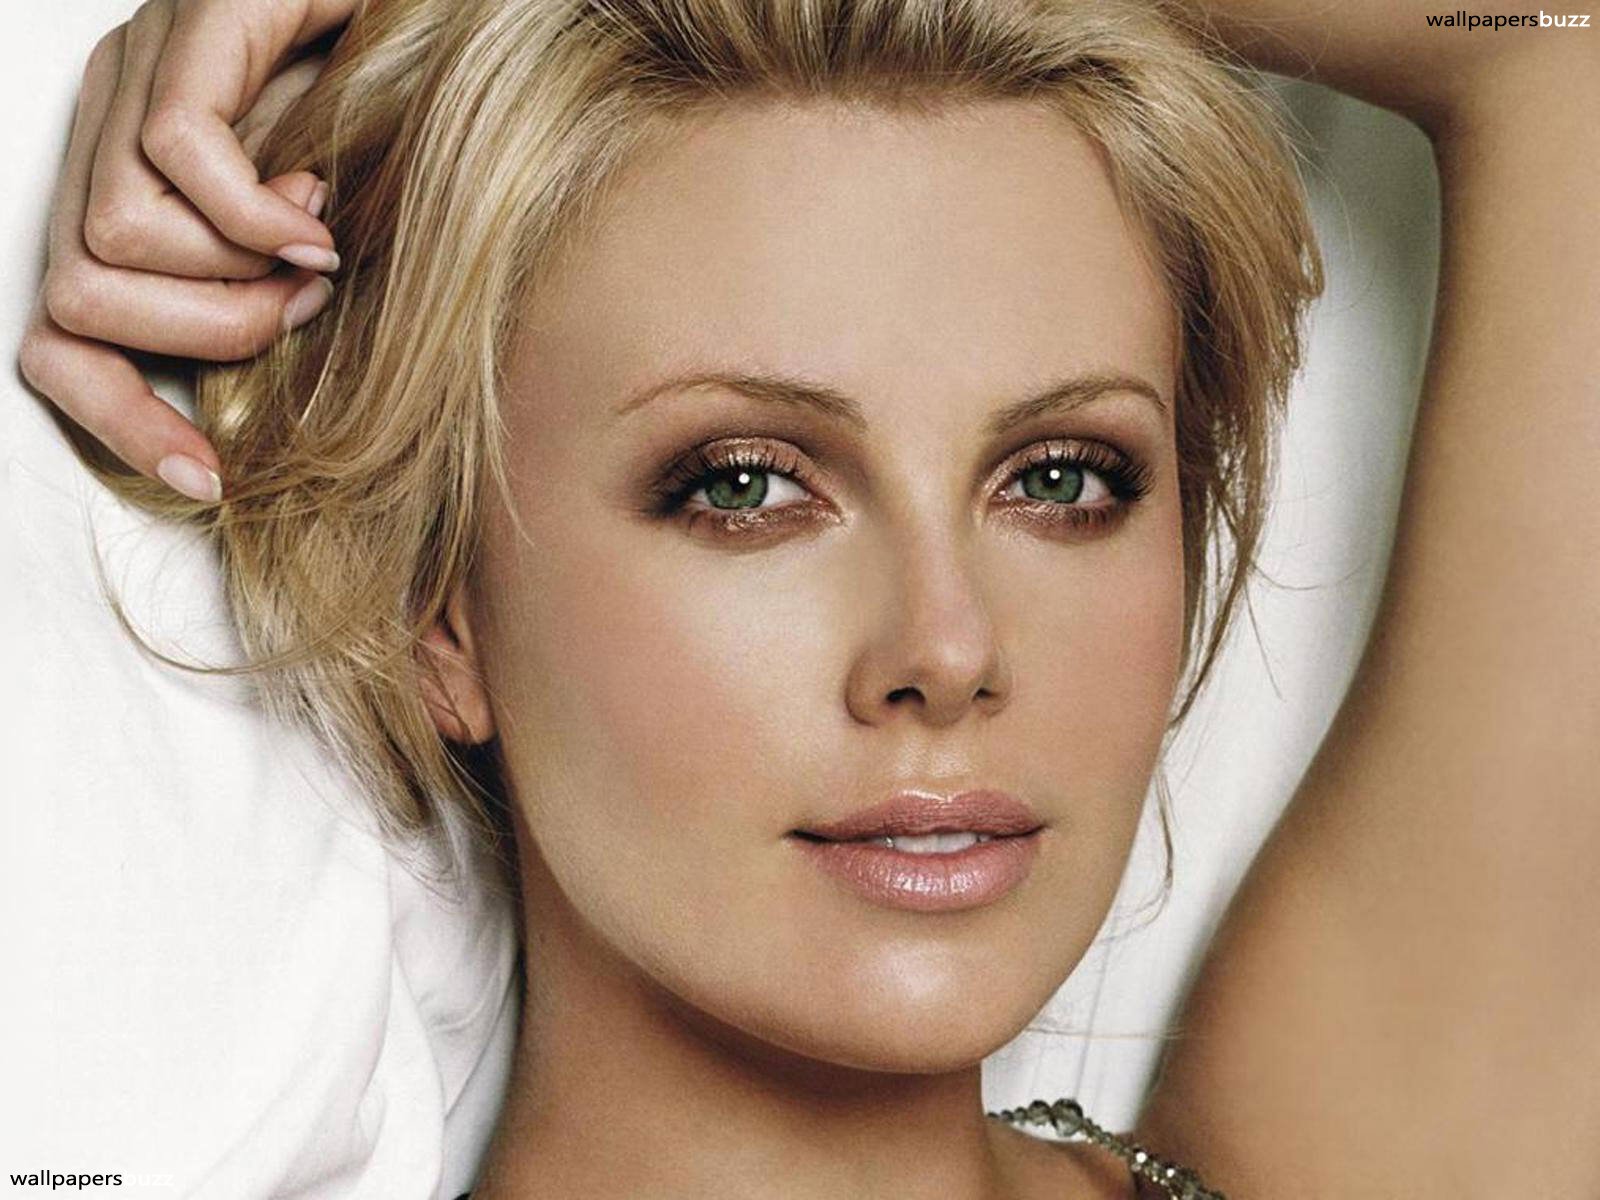 Charlize Theron Wallpaper HD Picture #ghahlkbe – Yoanu